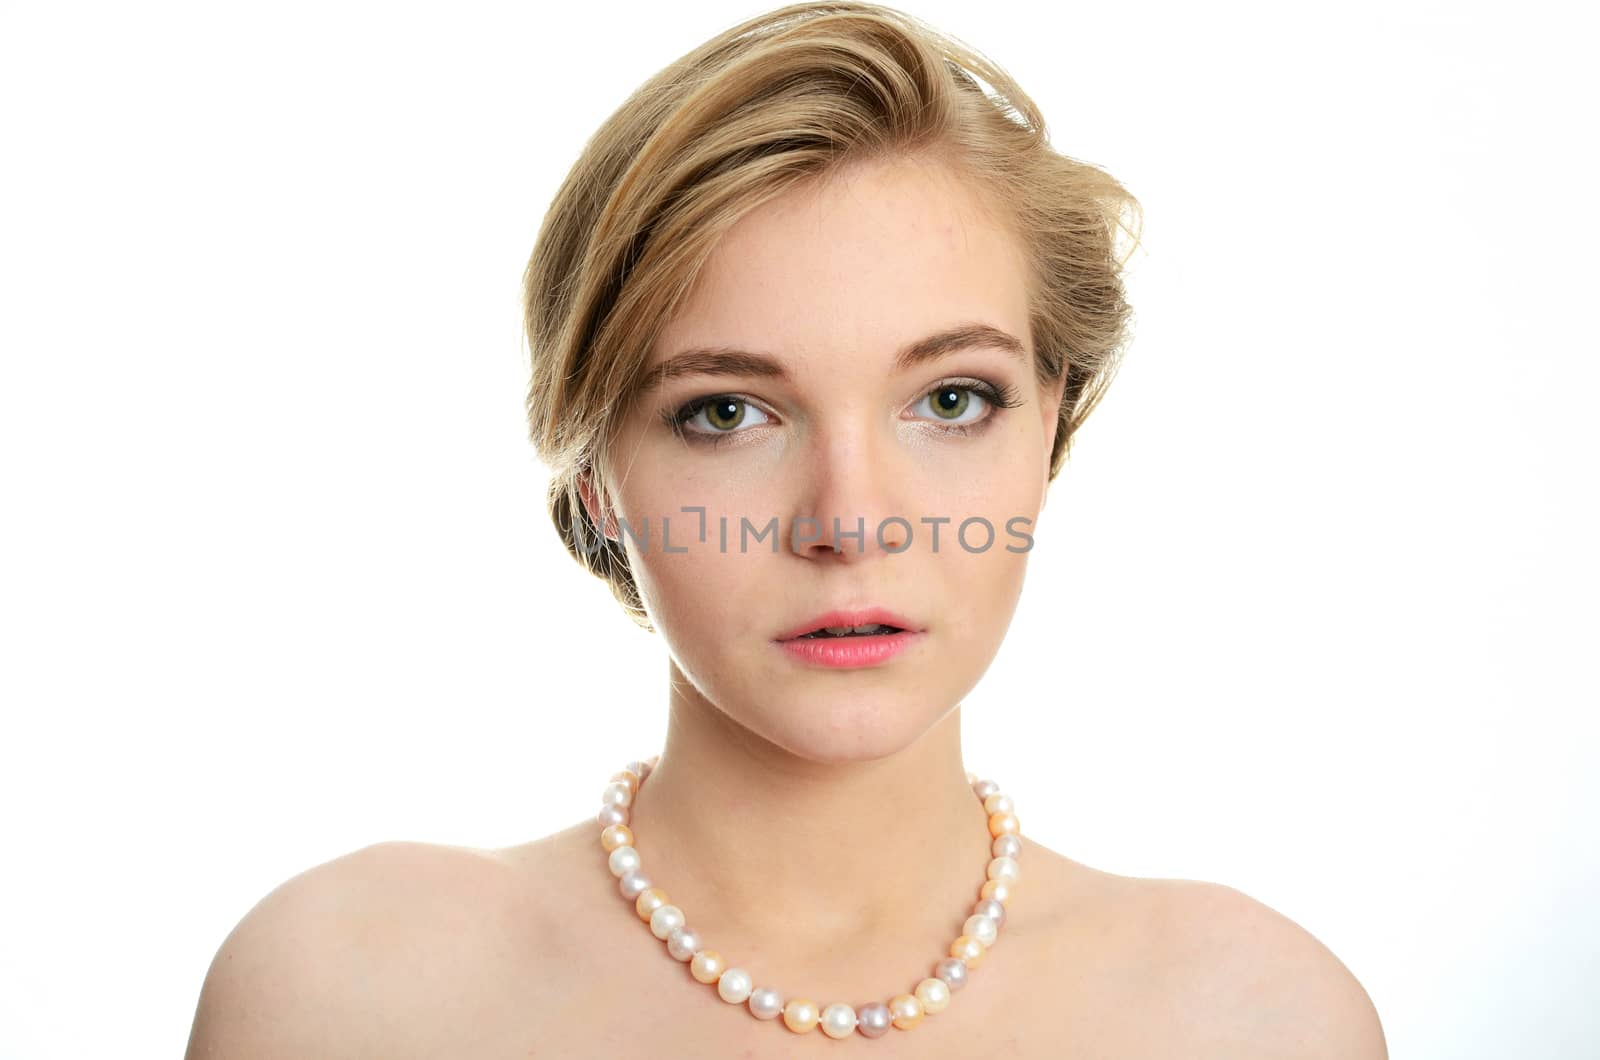 Beautiful female model with pearls on her neck. Portrait of young girl with soft and kind face expression.